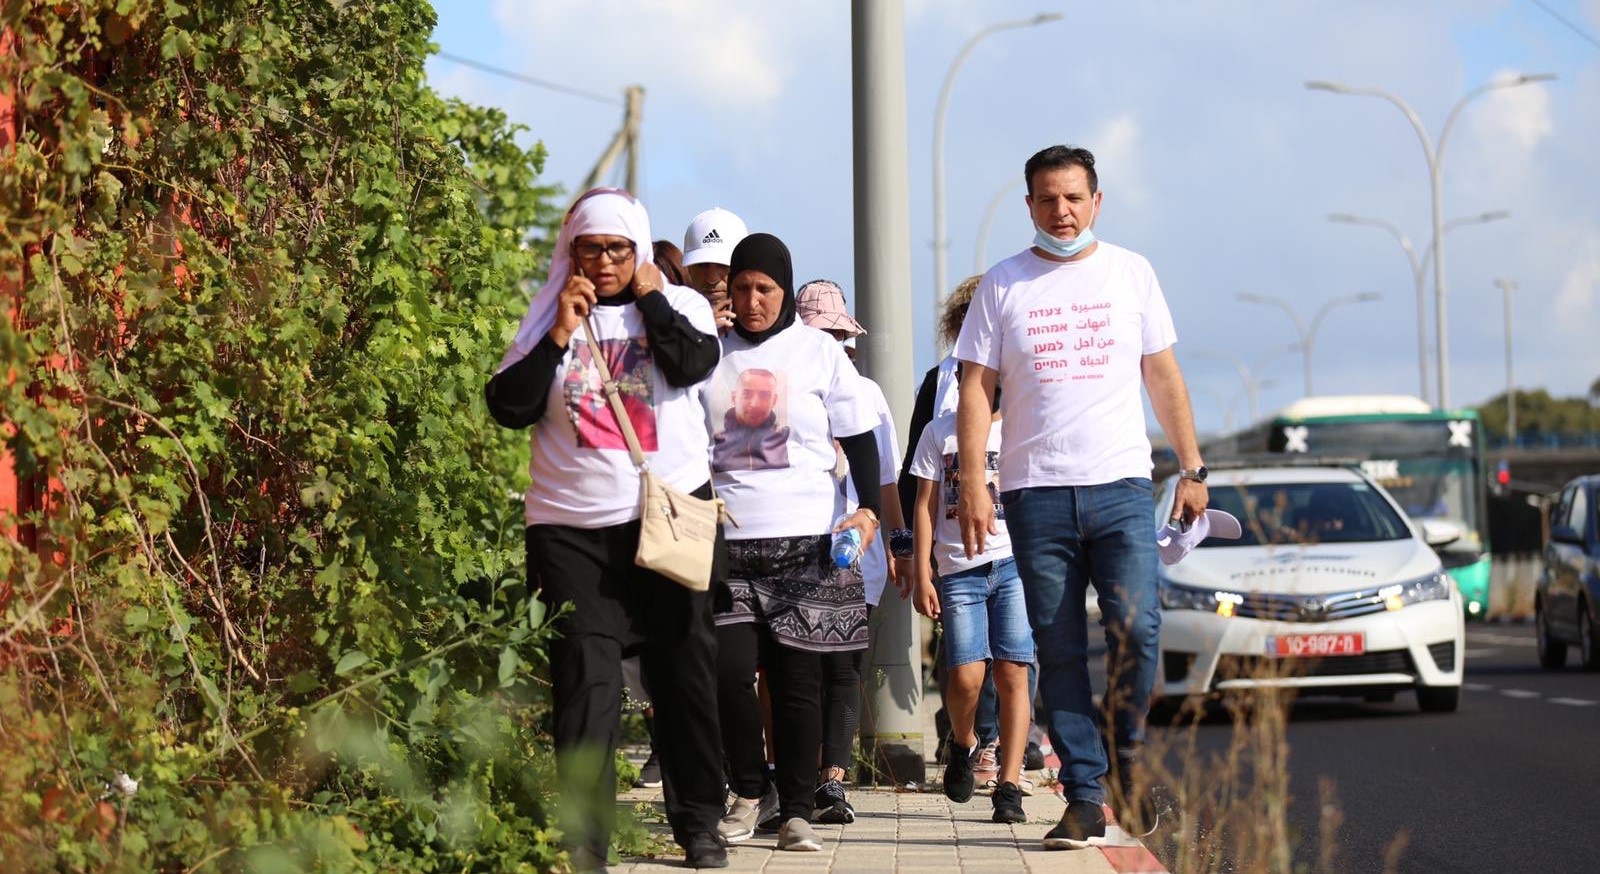 MK Ayman Odeh took part in the three-day "Mothers' March for Life" from Haifa to Jerusalem with the families of victims of violence in the Arab community, August 2020.